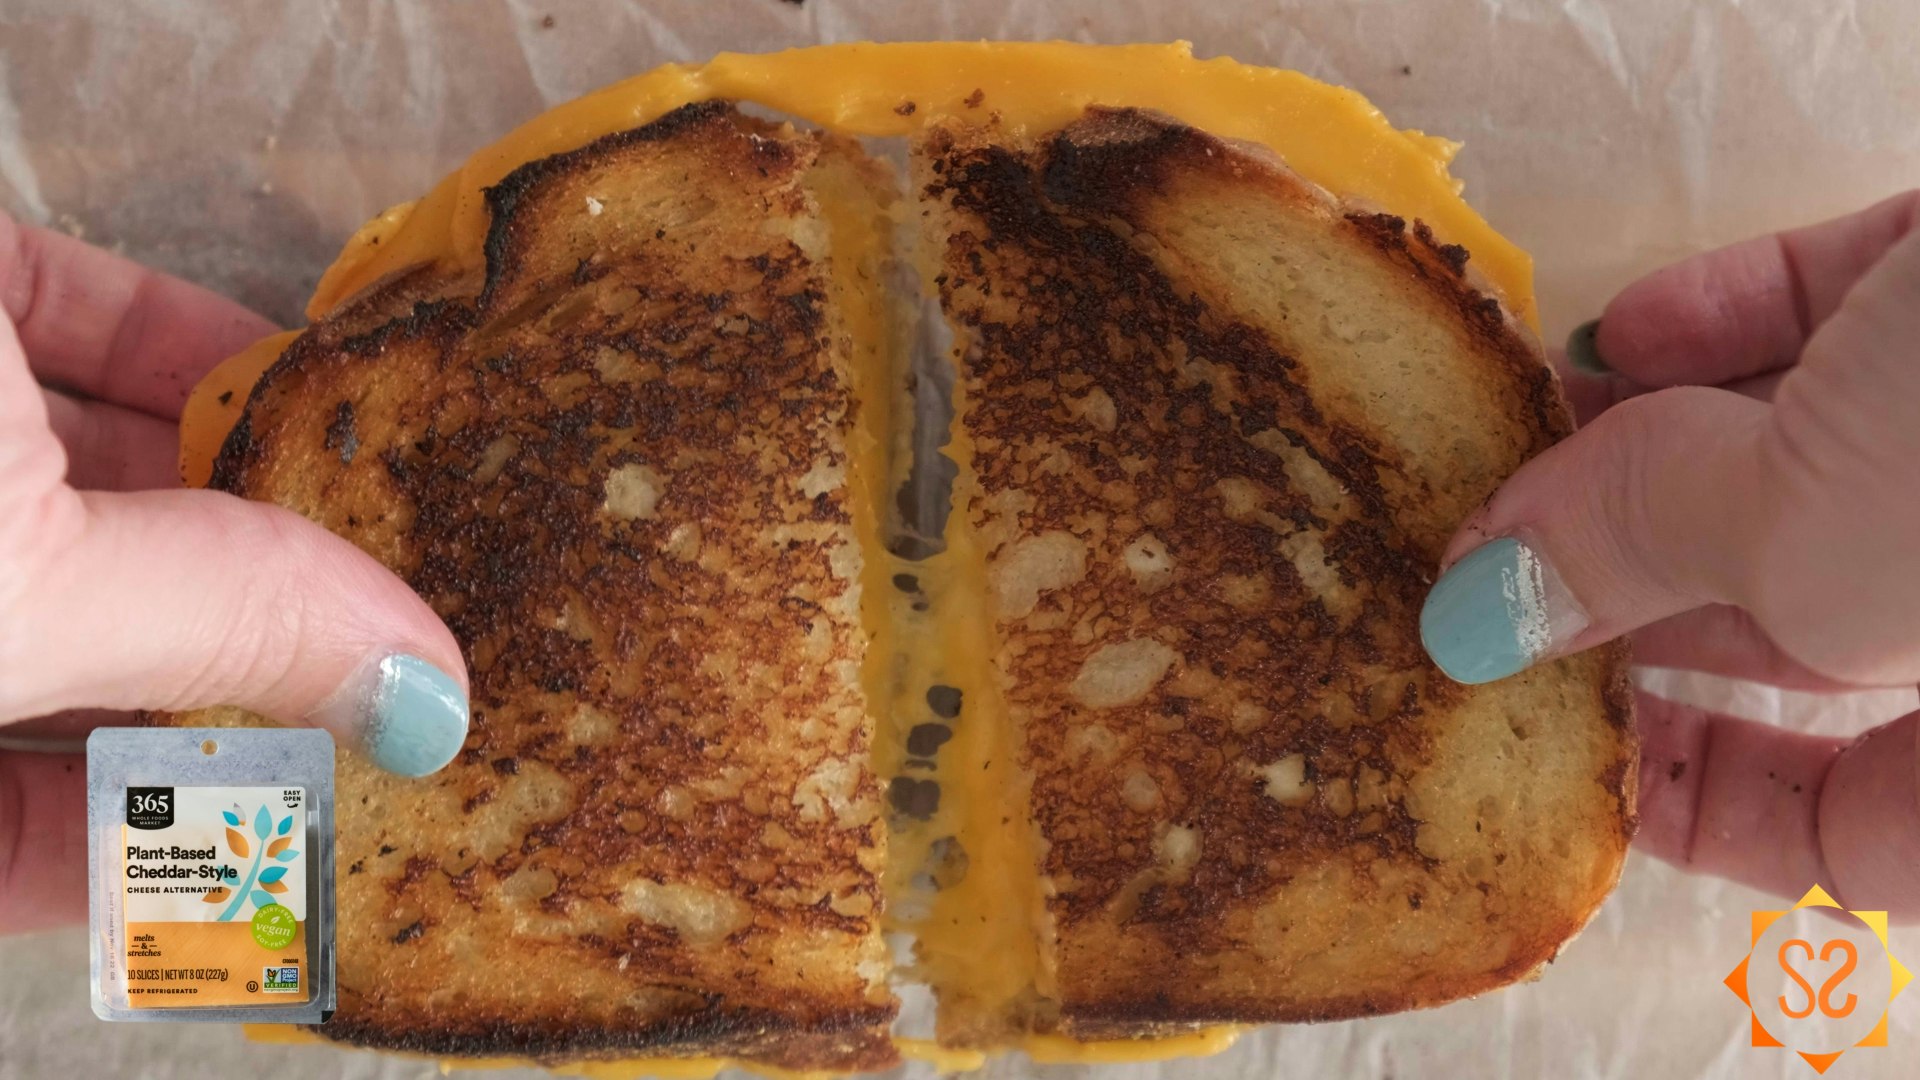 Hands pulling apart a grilled cheese sandwich made with 365 plant-based cheddar